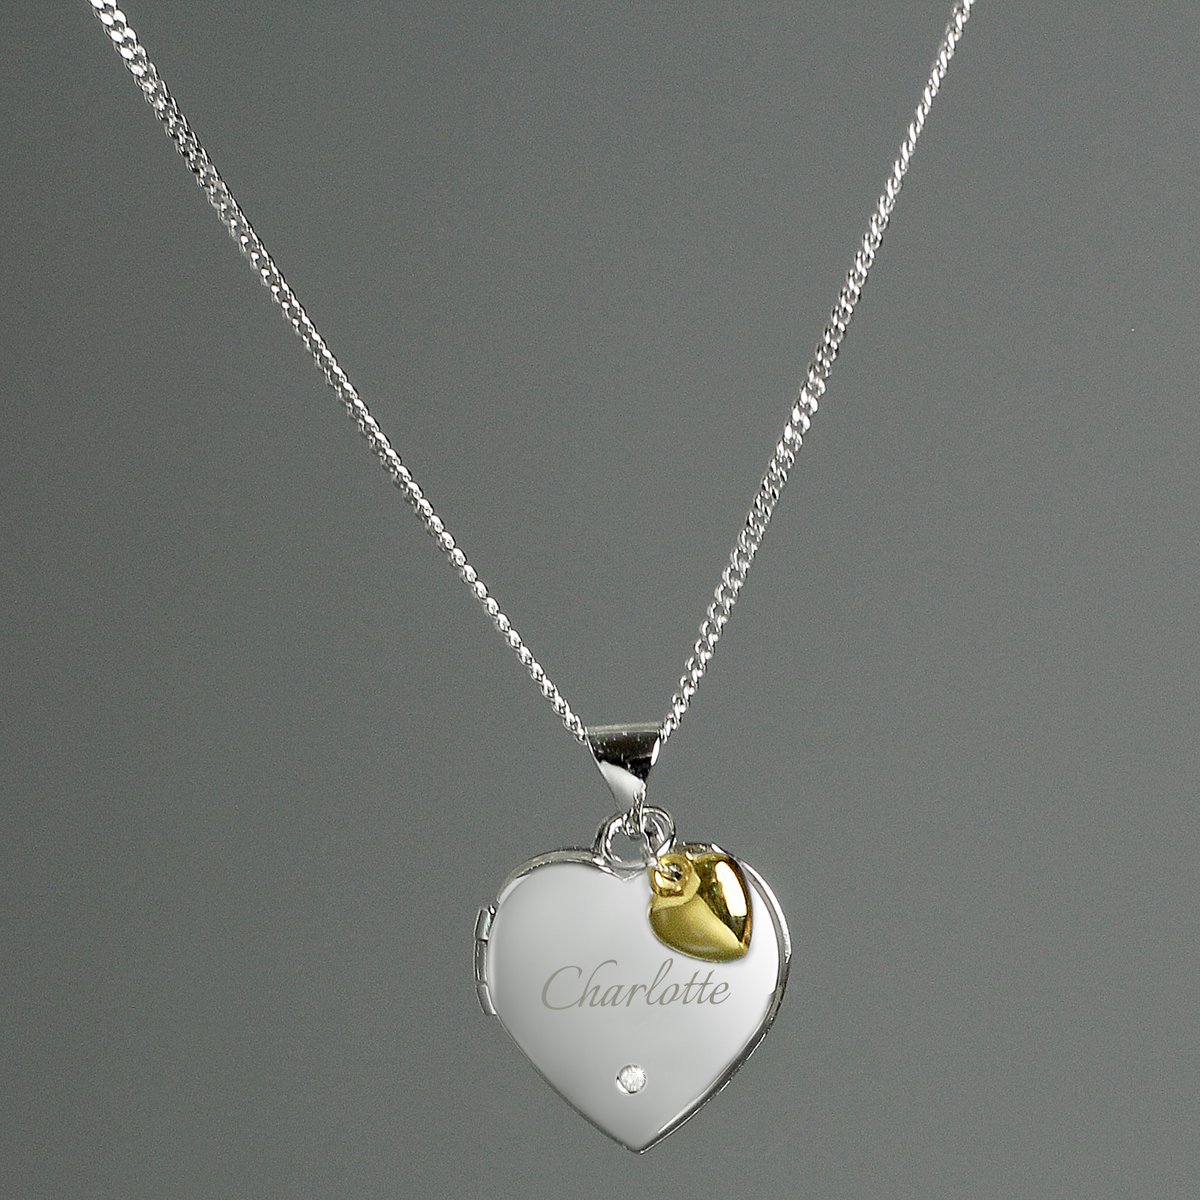 This sterling silver locket features a diamond  under the name and a gold plated mini heart charm. Personalised with any name lilyblueuk.co.uk/personalised-s…

#jewellery #necklace #silverjewellery #giftideas #shopsmall #shopindie #EarlyBiz